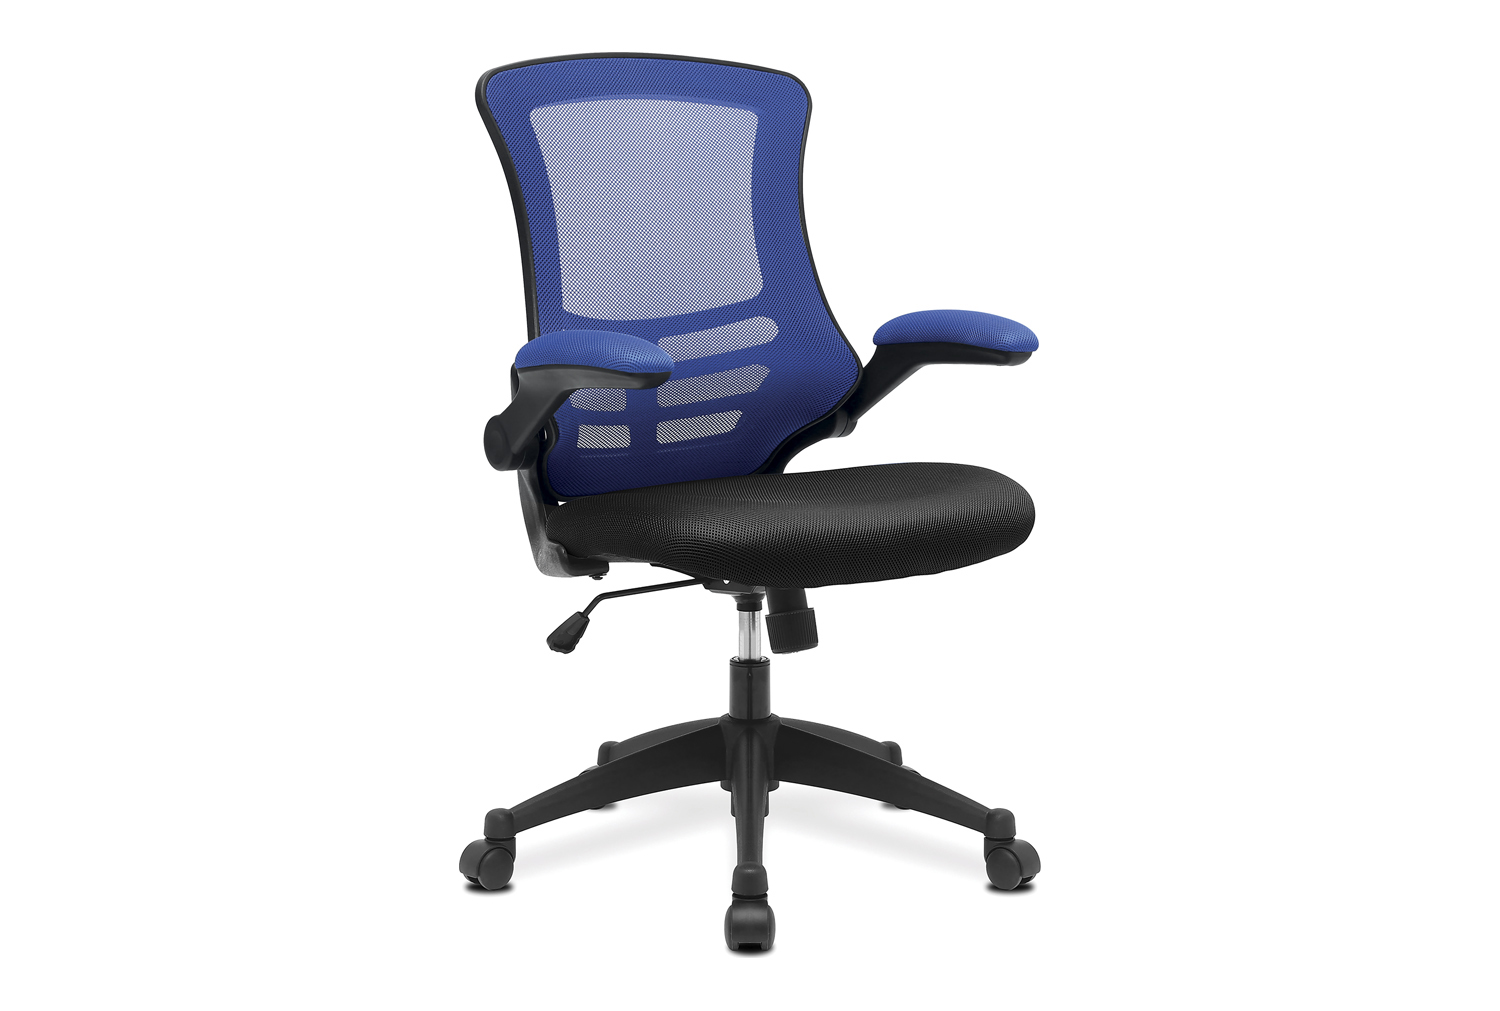 Moon High Mesh Back Operator Office Chair With Black Base (Blue/Black), Fully Installed